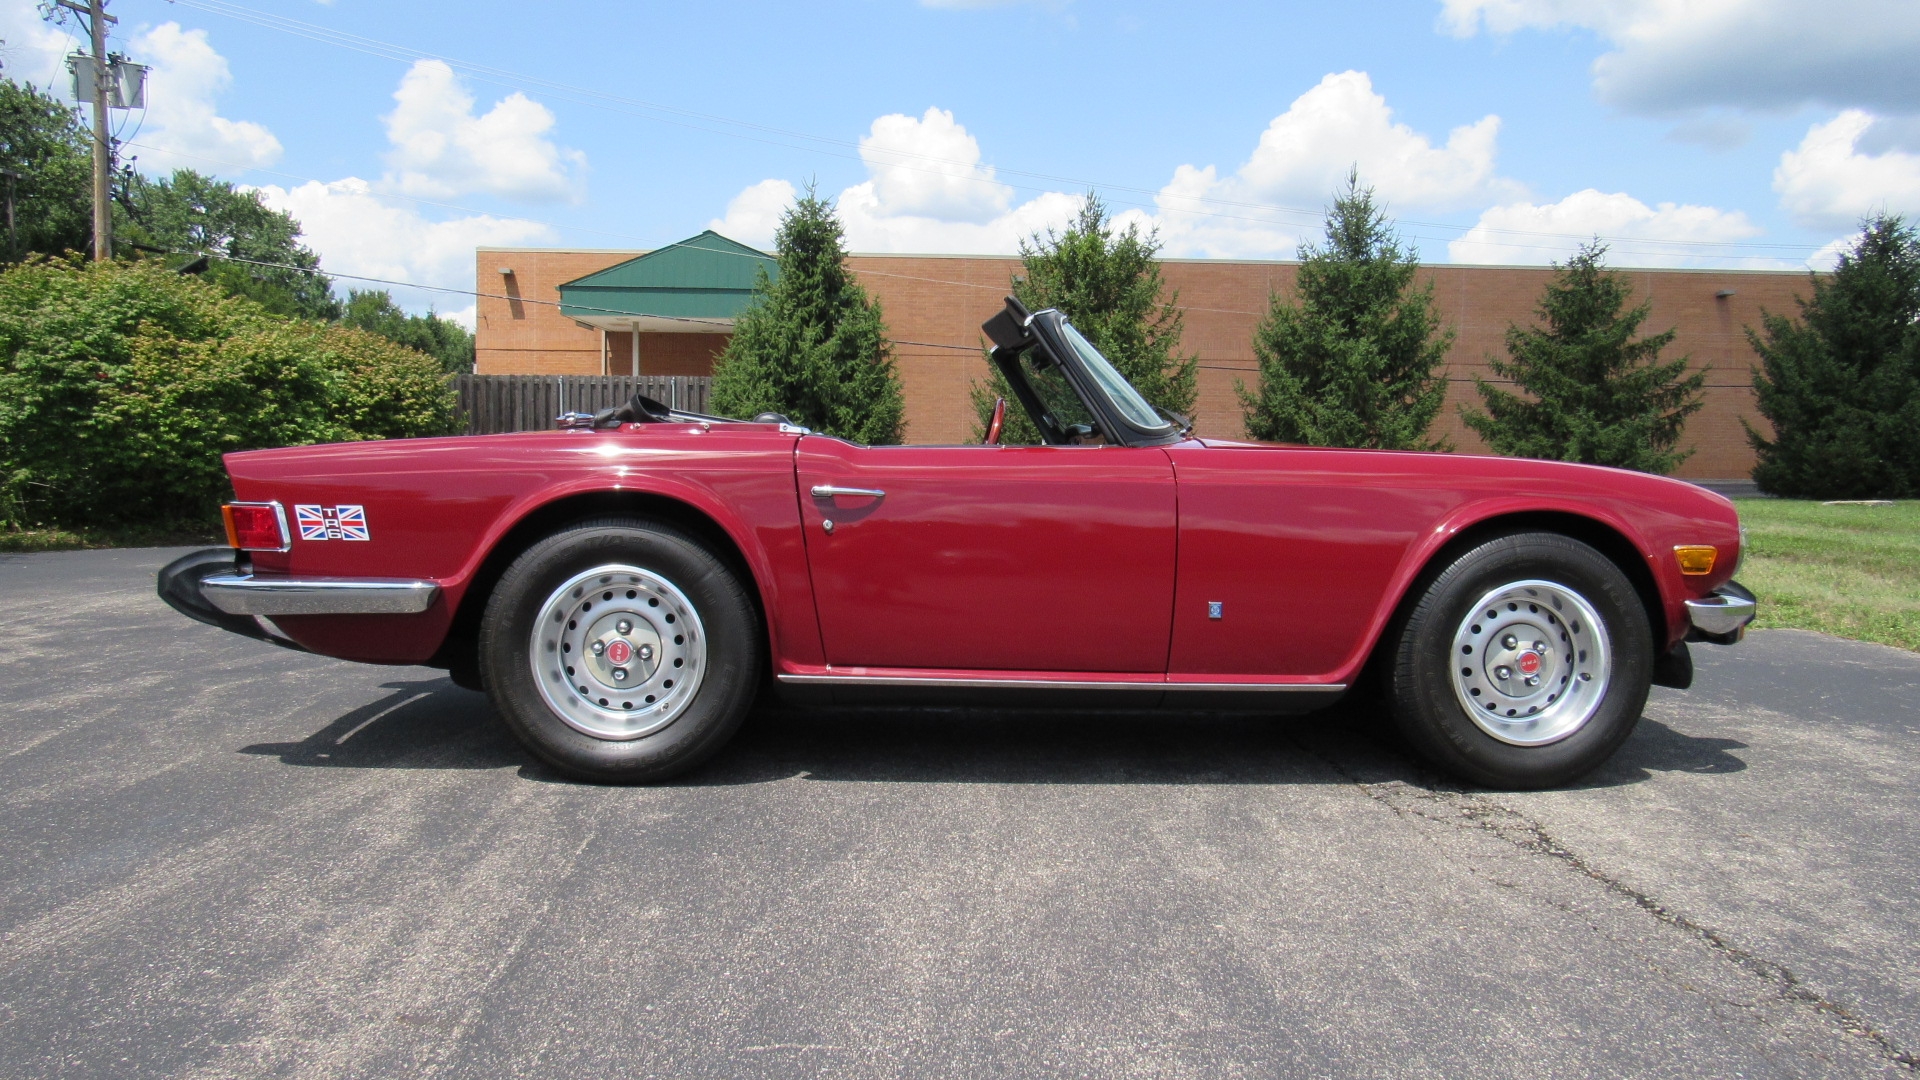 1976 TR6, Carmine Red, Restored, SOLD!